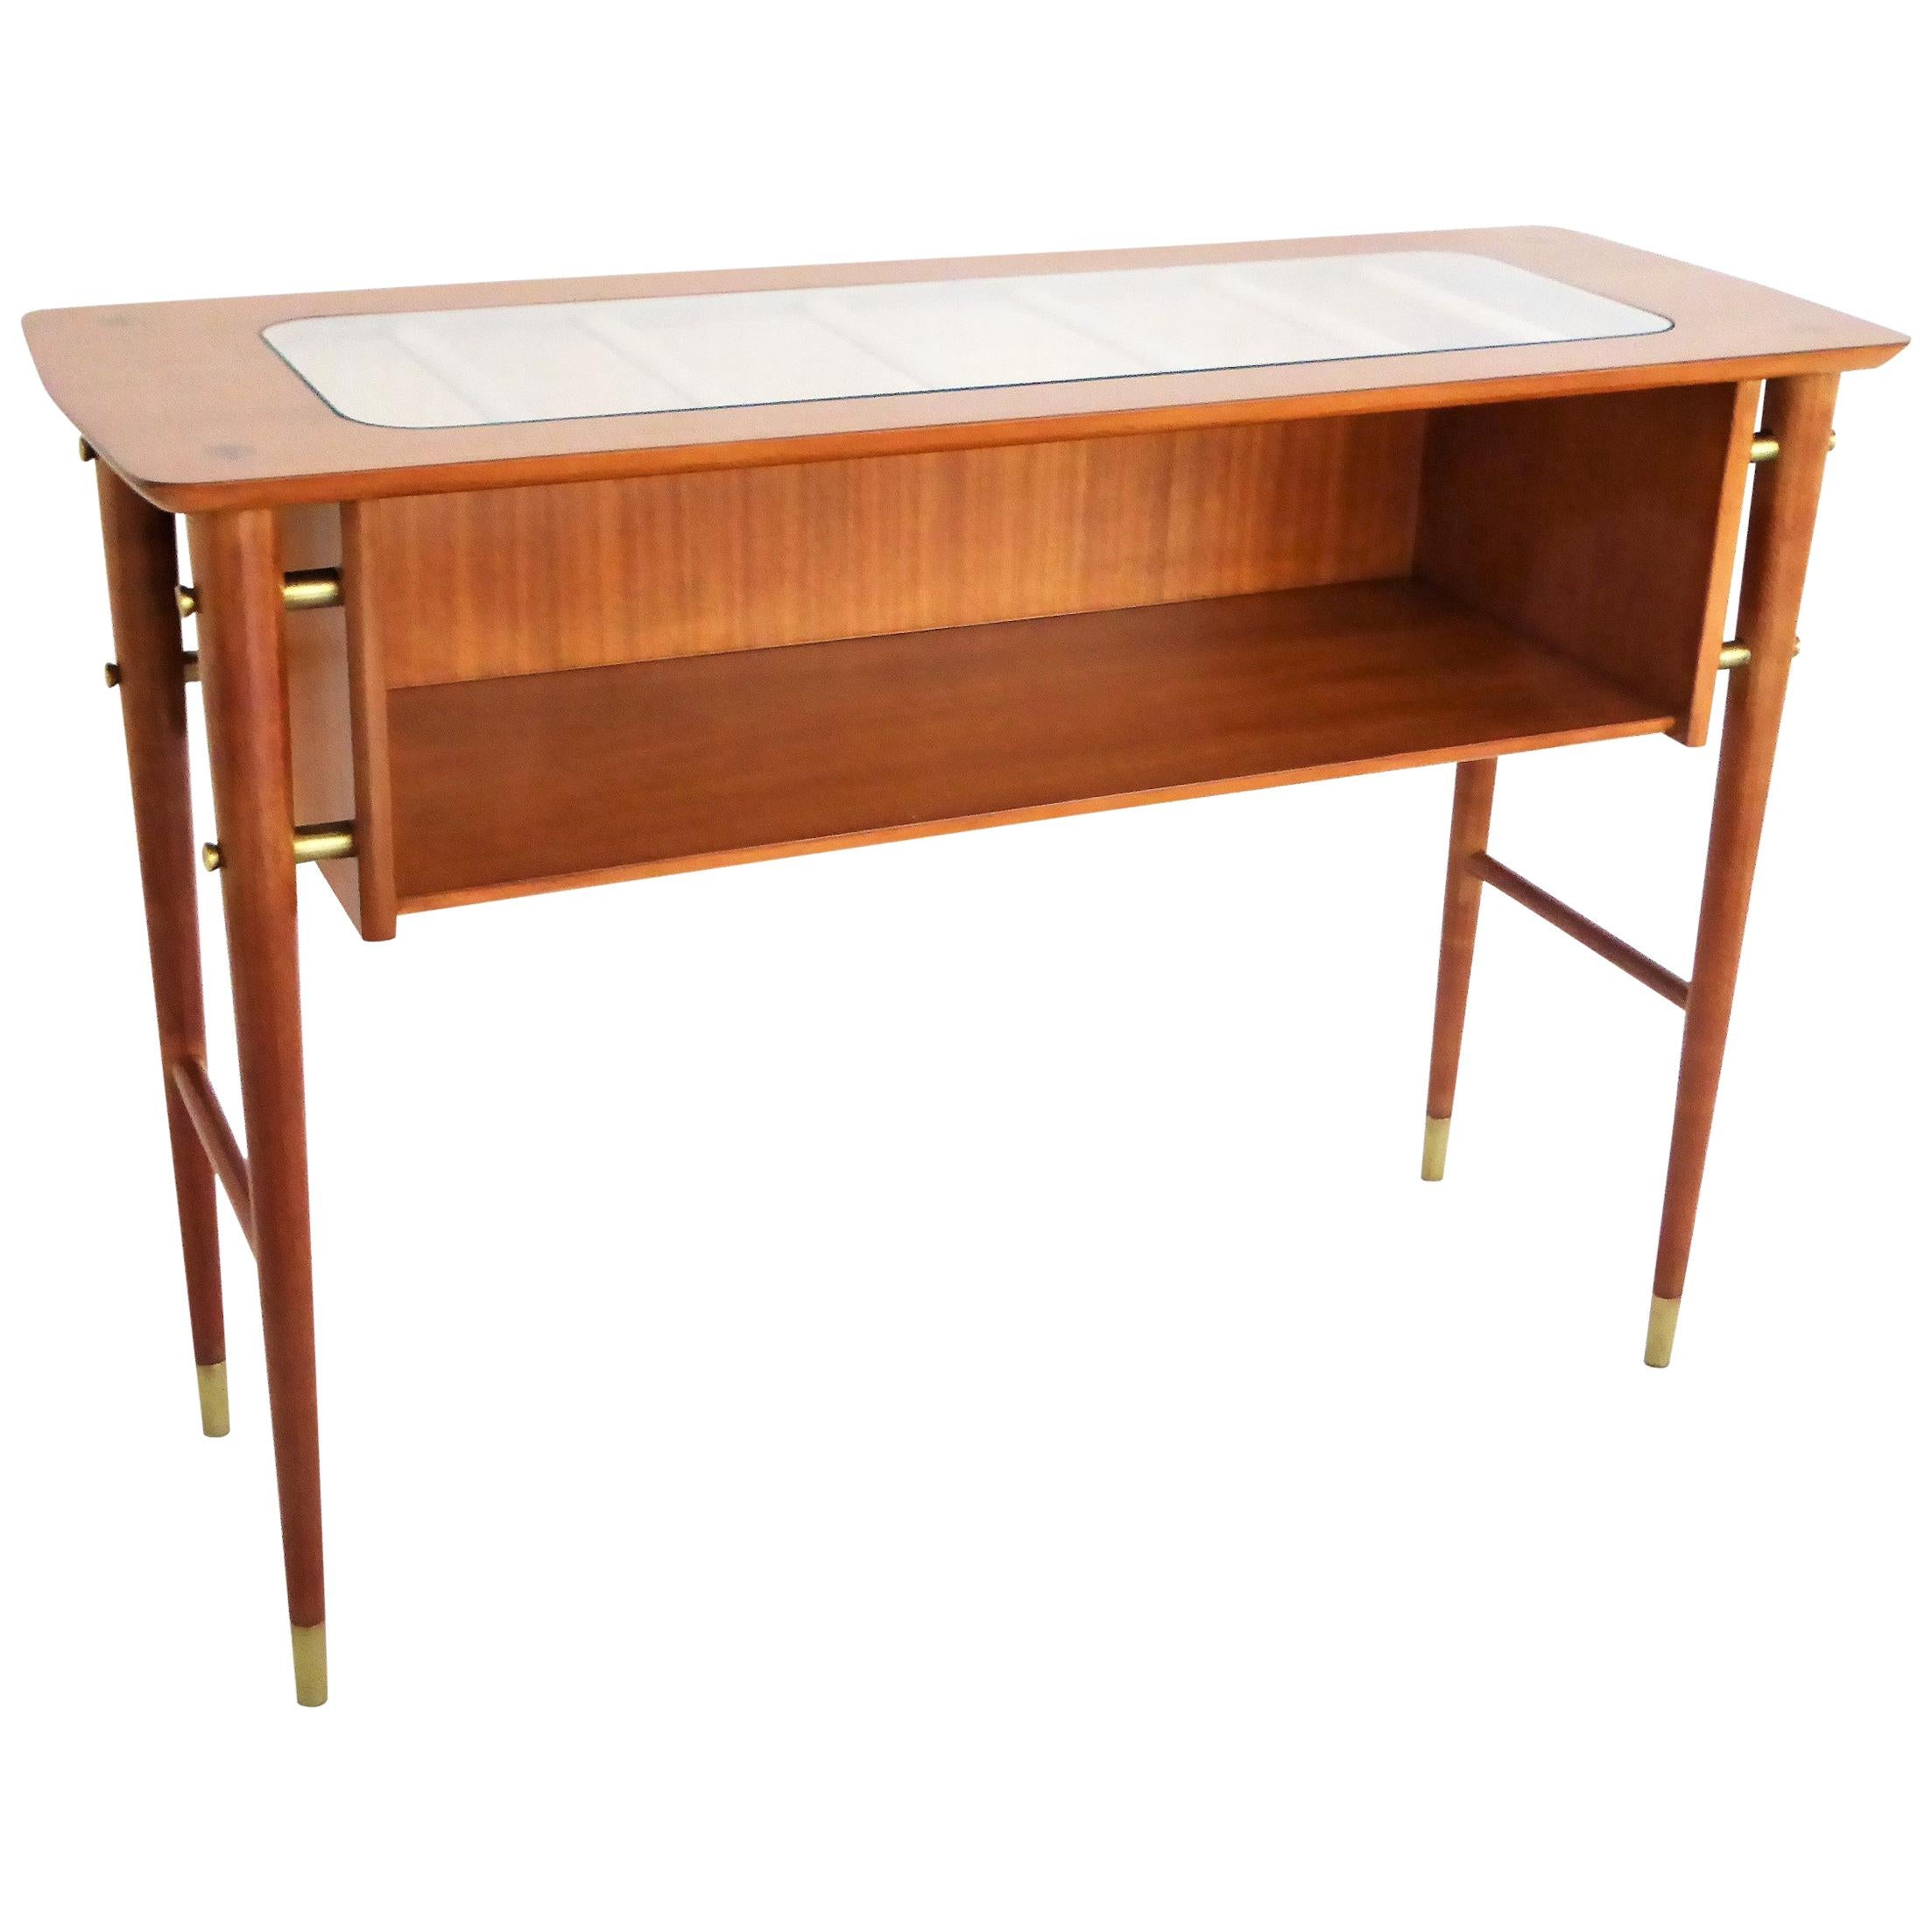 1950s Gio Ponti Style Petite Console Table with Shelf in Blond Mahogany